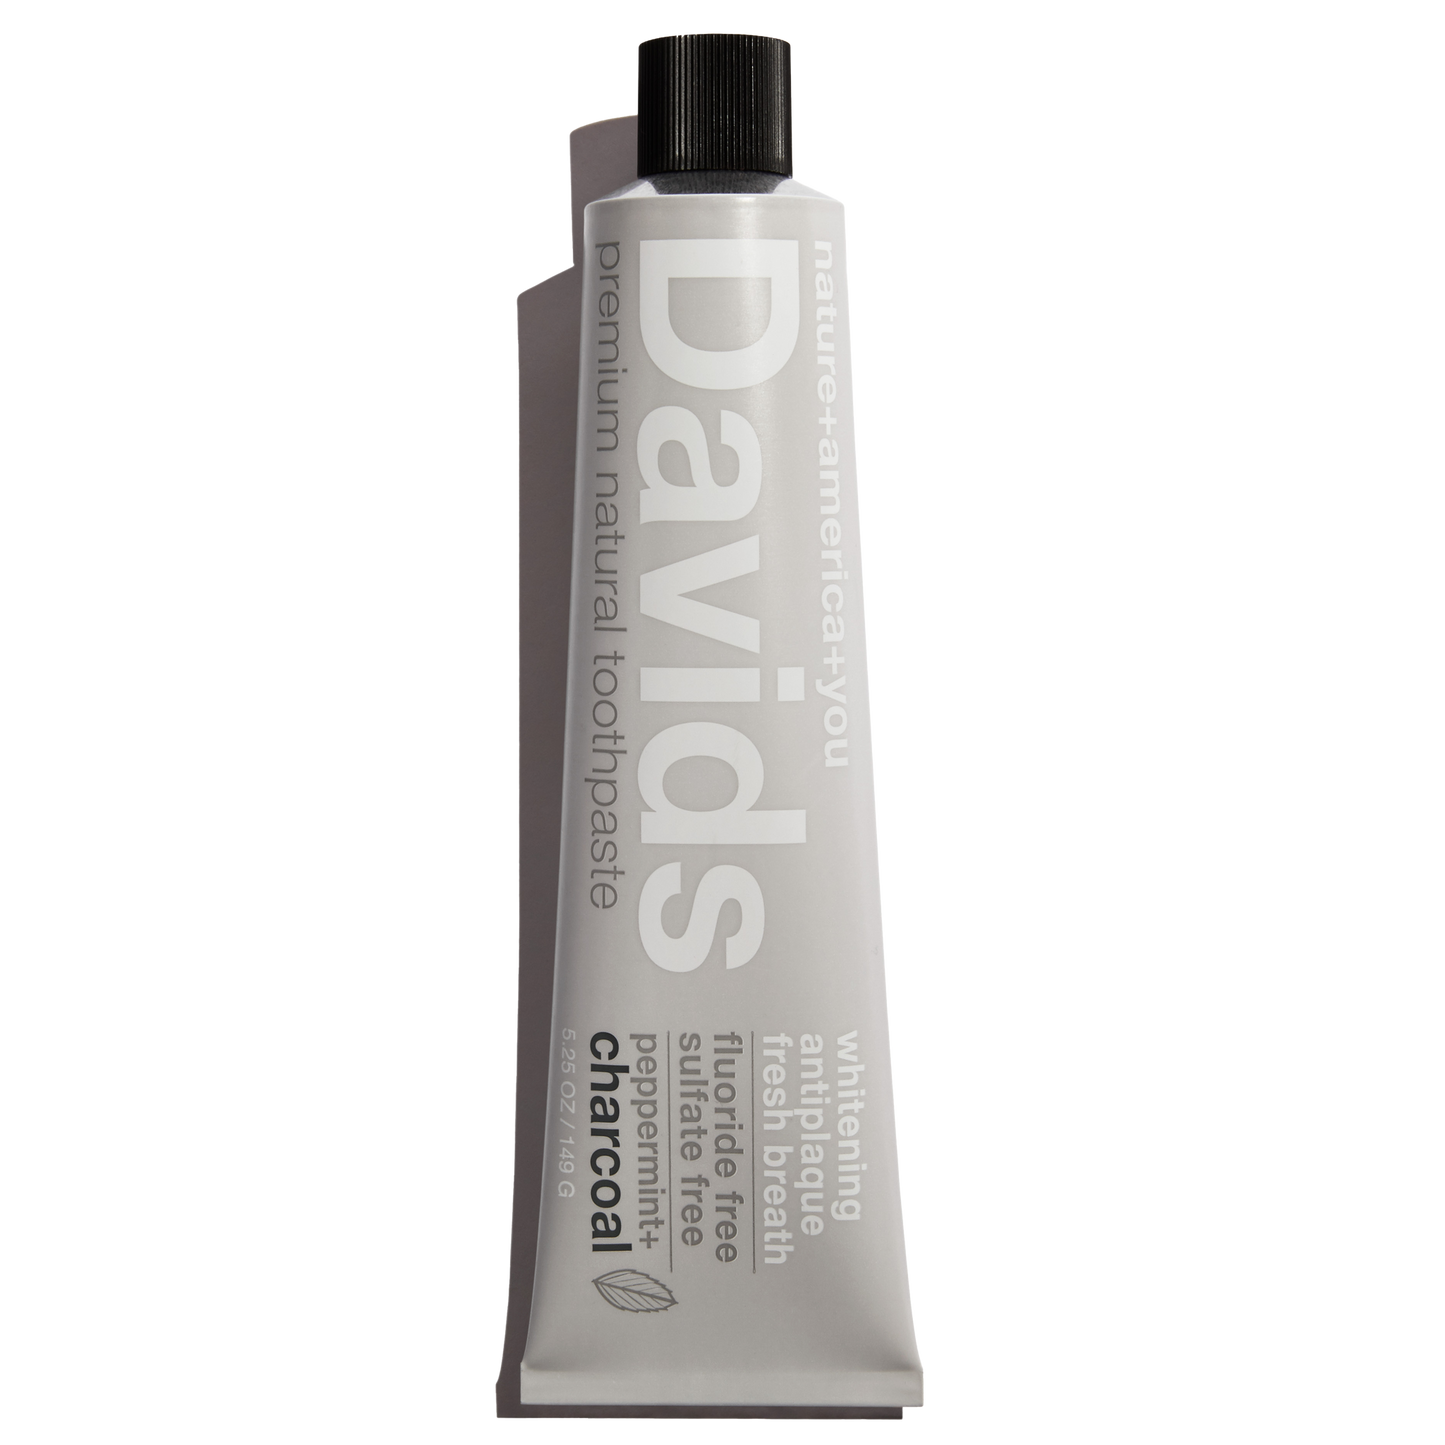 Davids charcoal+peppermint premium natural toothpaste